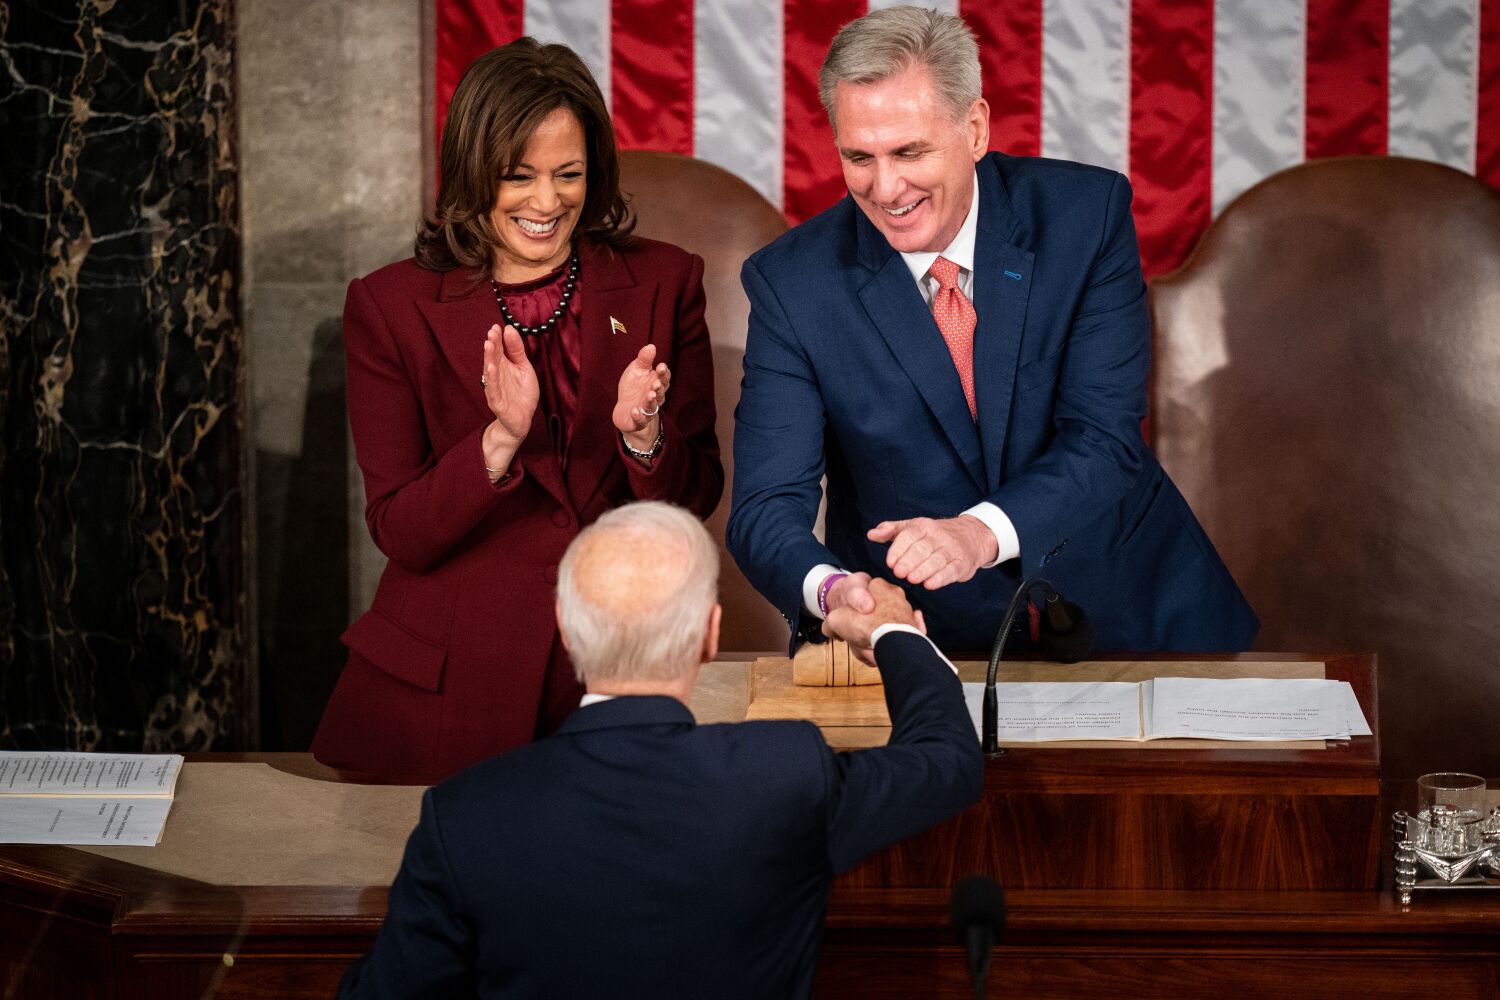 Abcarian: I almost wrote off Joe Biden in 2020.  Boy, was I wrong then. What about now?  